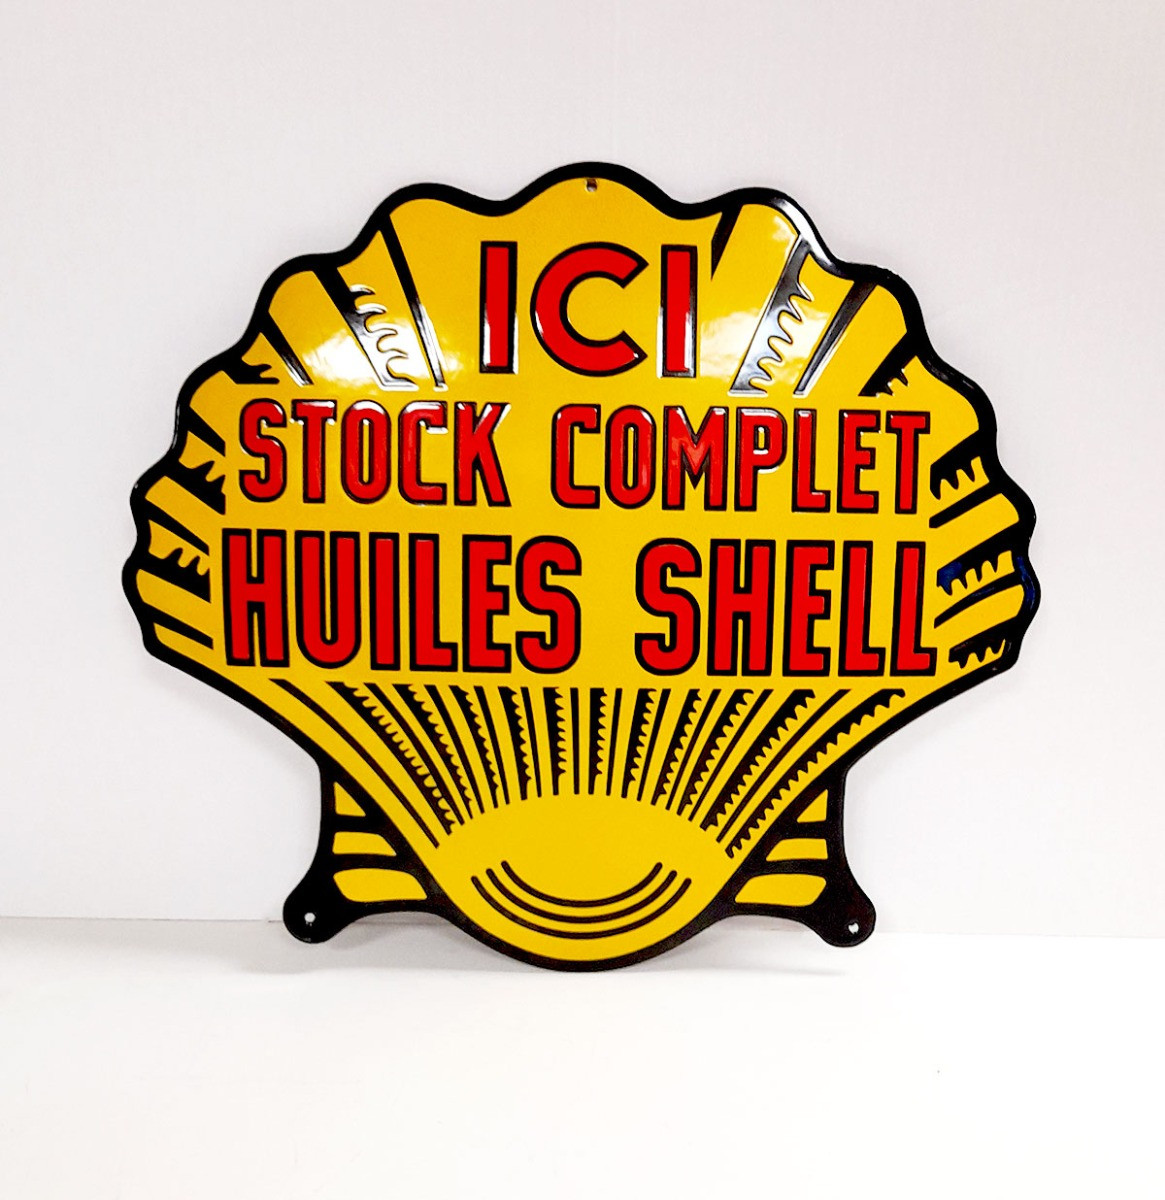 Huiles Shell Emaille Bord - 50 x 45cm